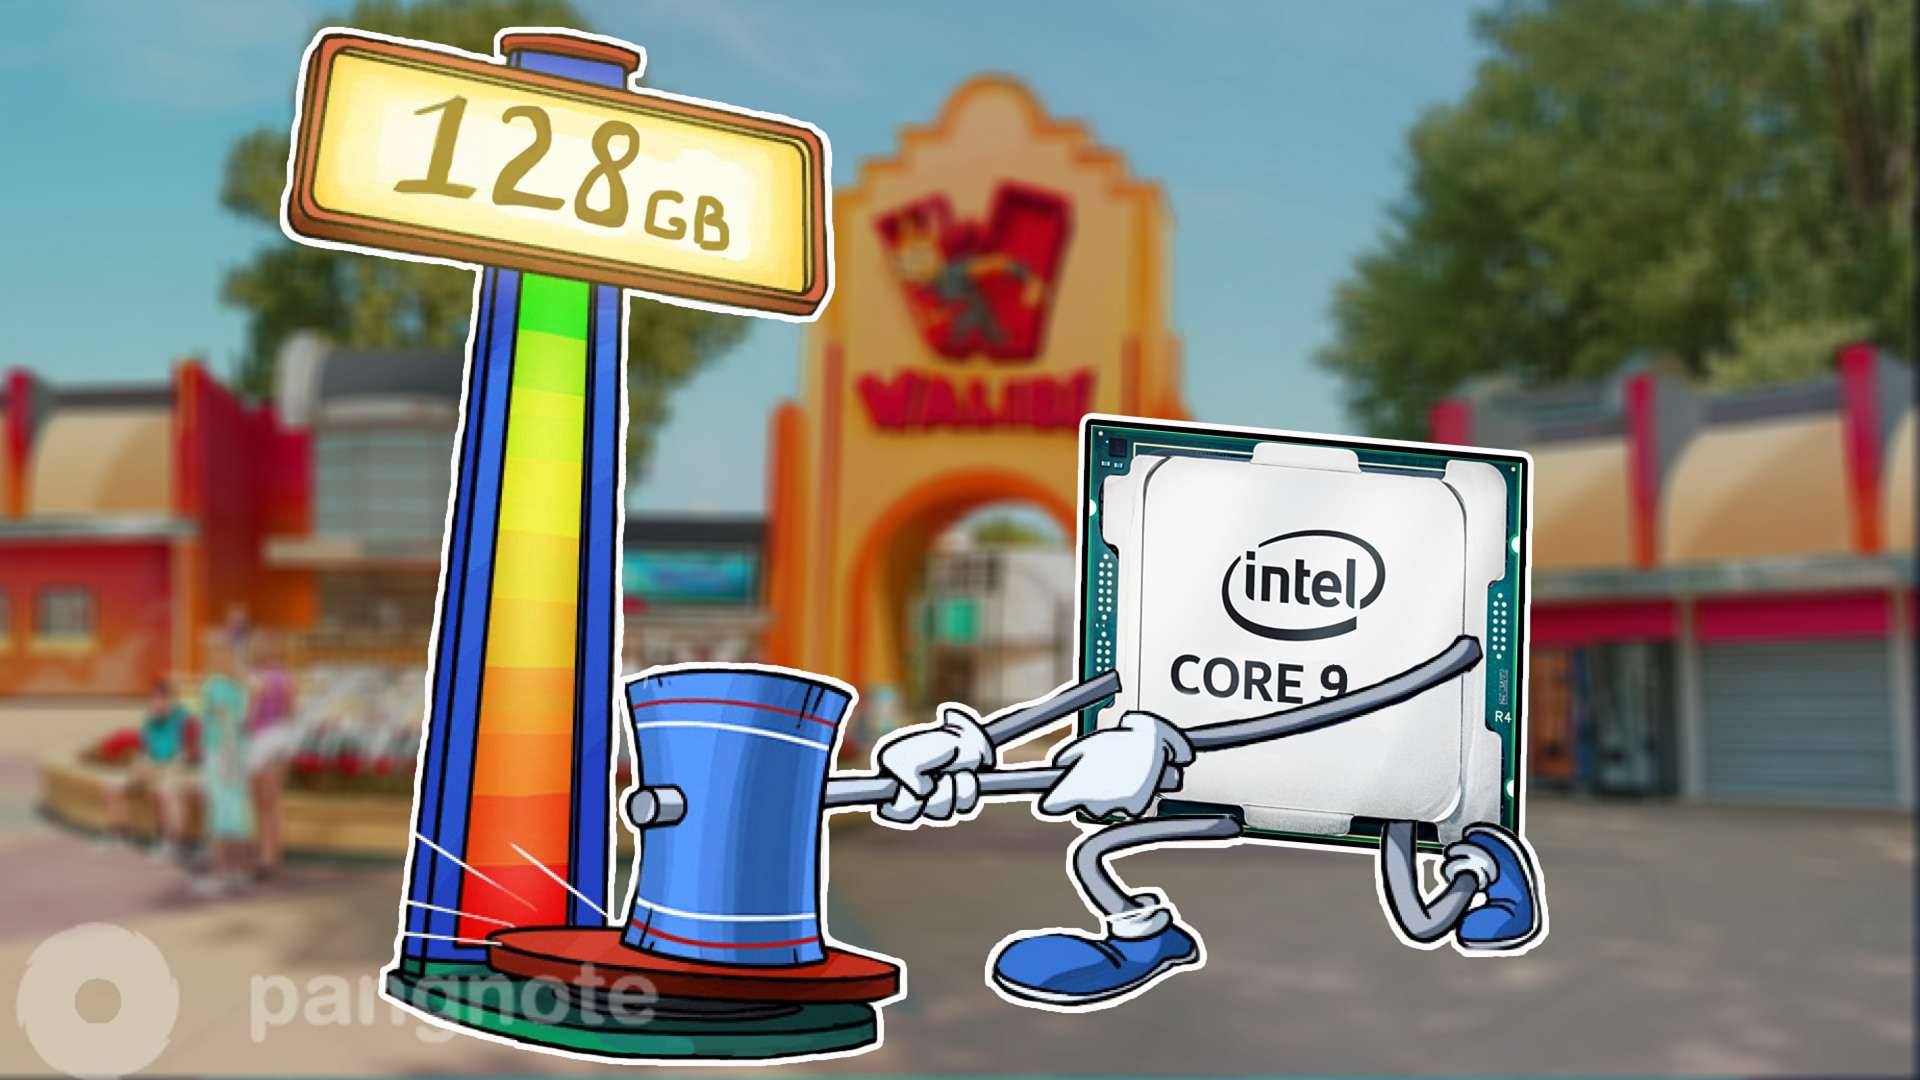 The new Intel Core 9th will support up to 128 GB of RAM